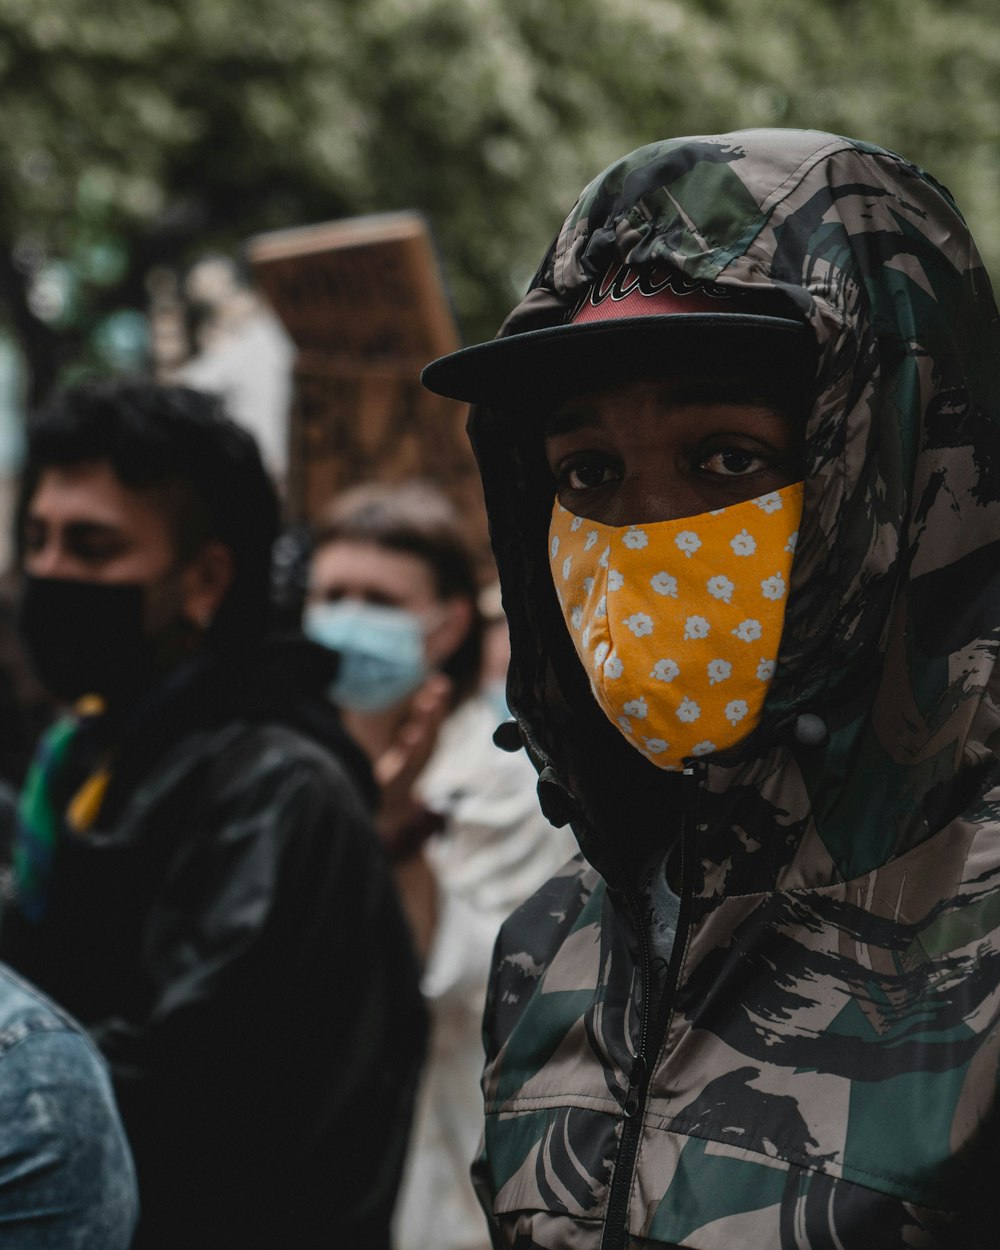 person wearing camouflage jacket and mask